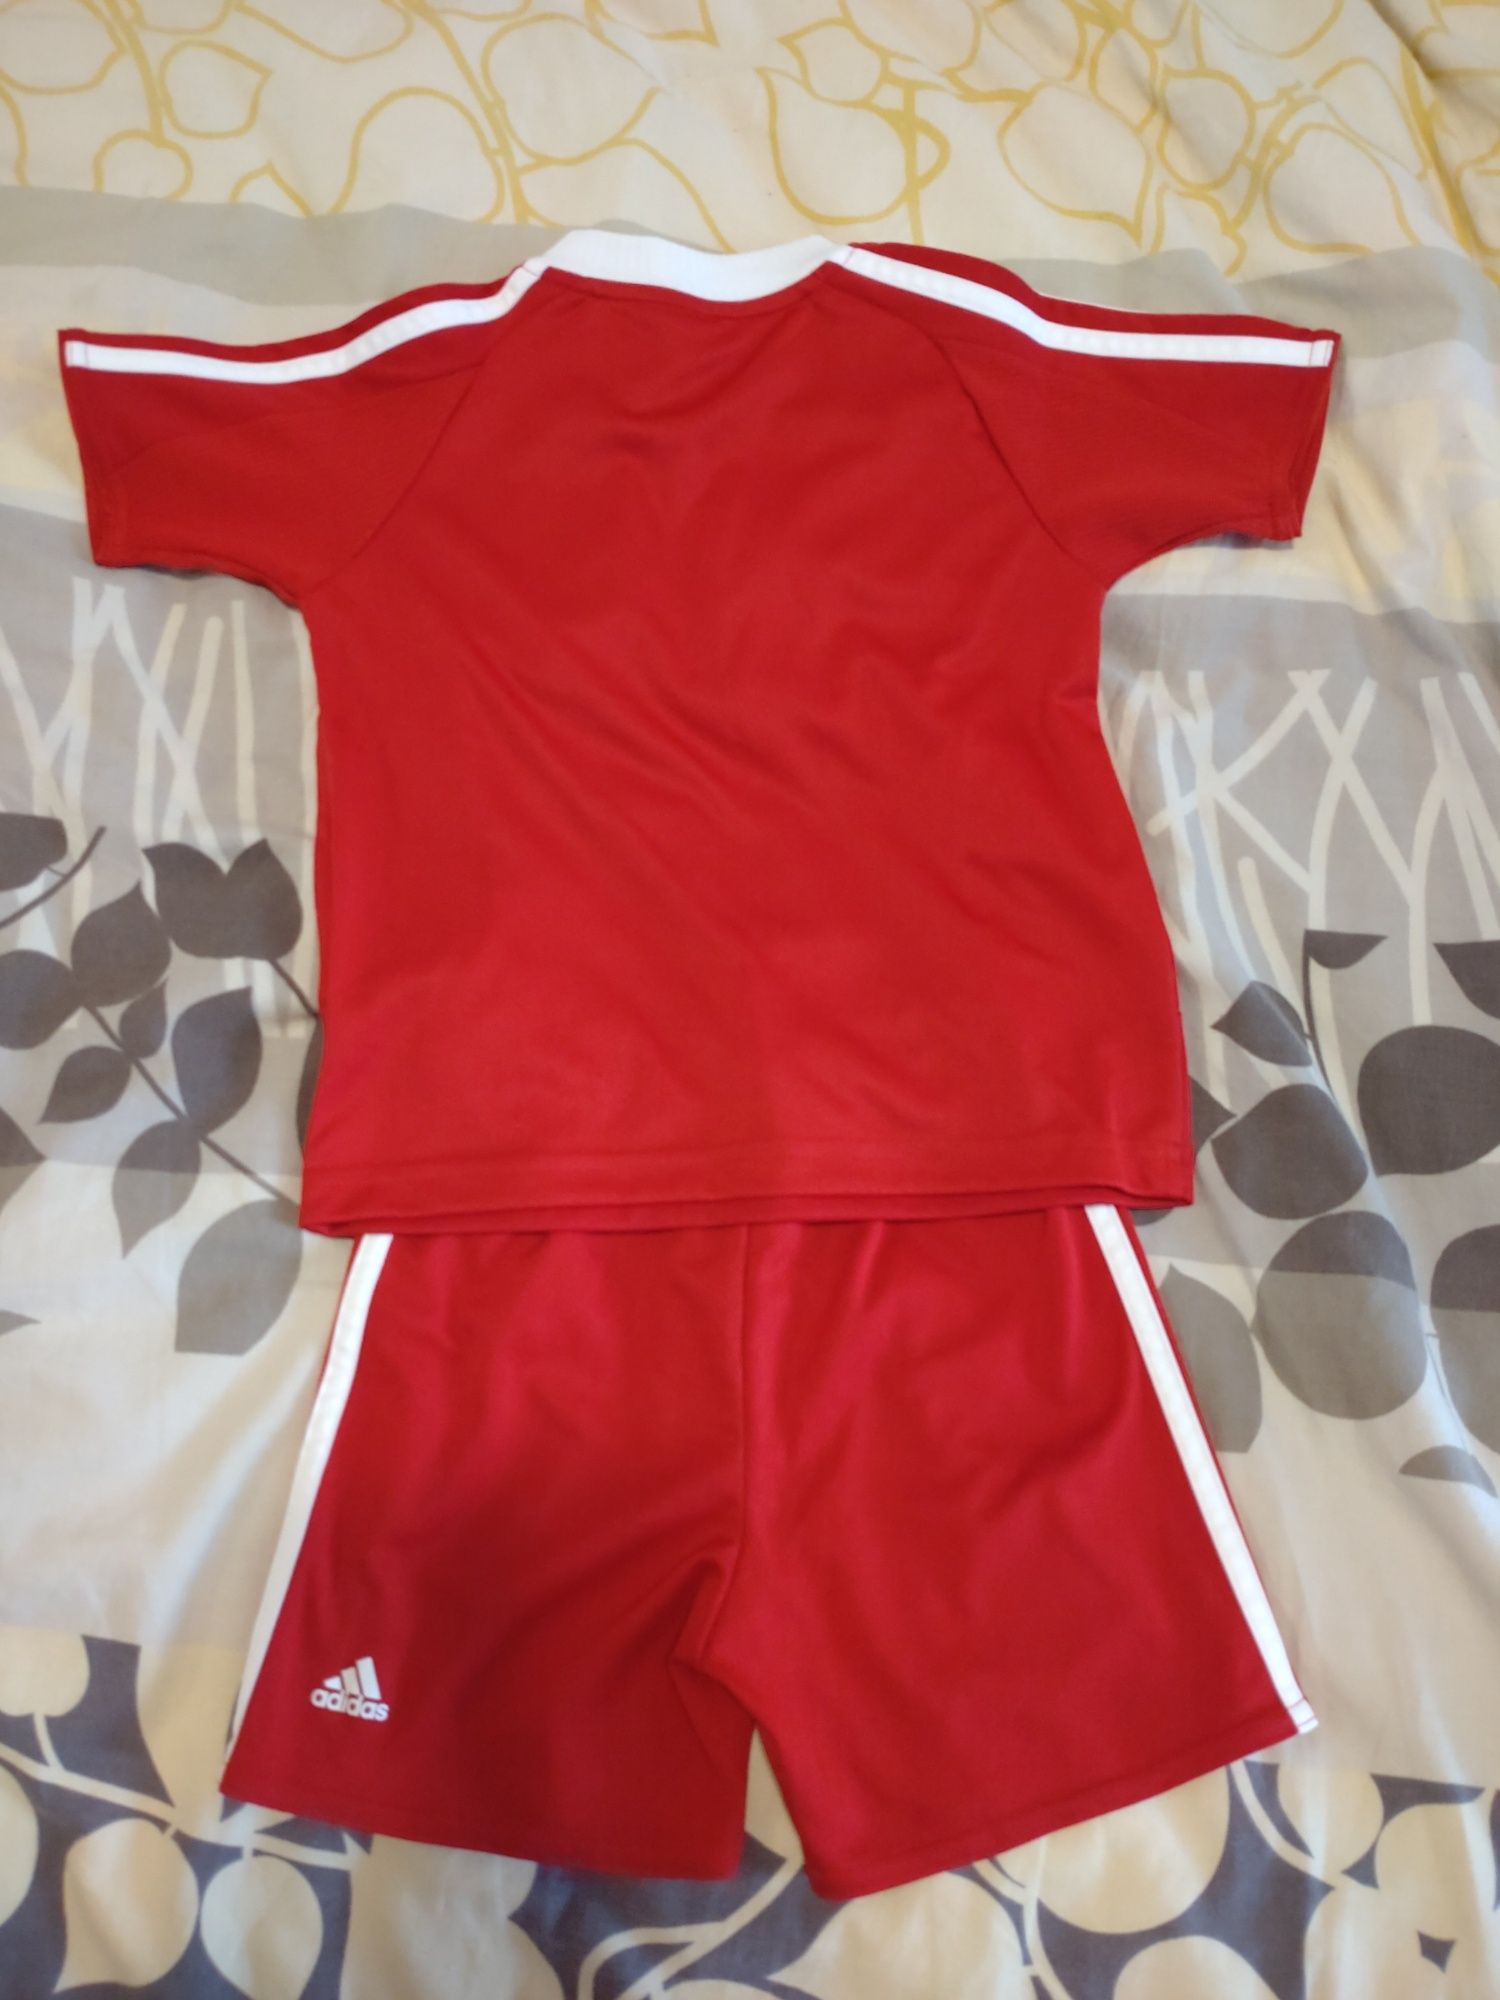 Liverpool FC Adidas Climacool 2010-2011 Jersey, 12-24 months